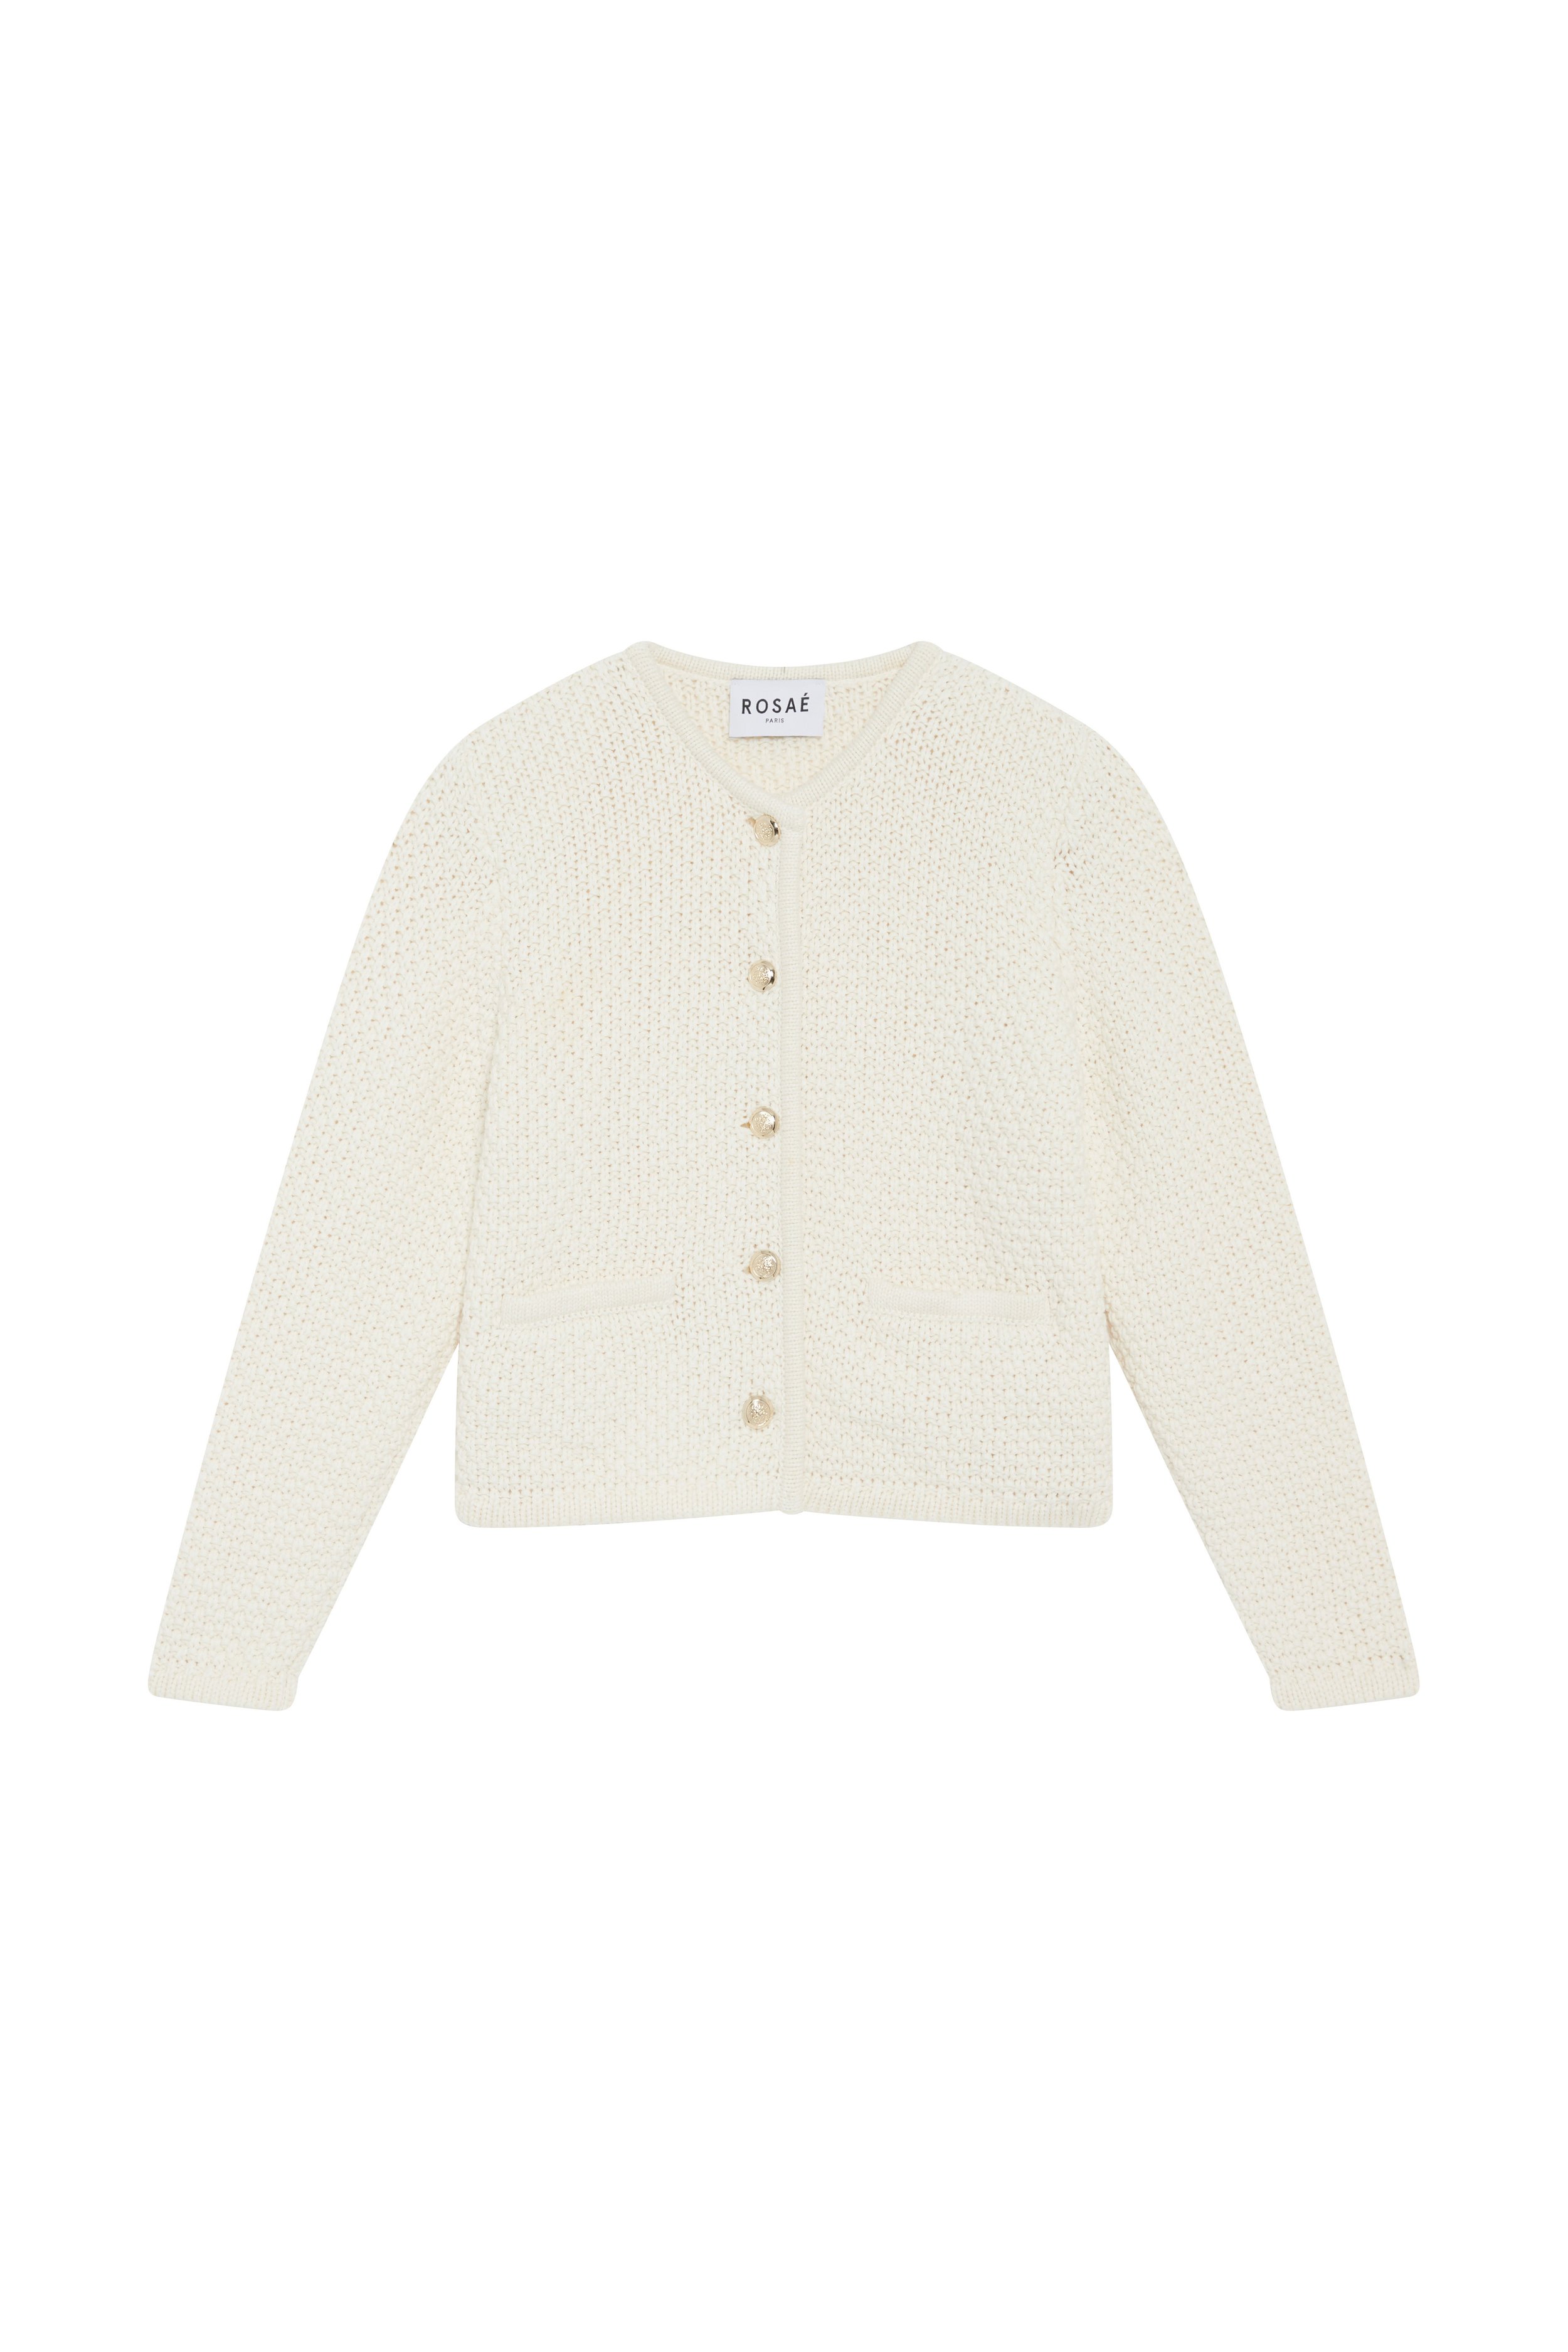 Le Francisco - Ultra-Desirable Knitted Jacket — Rosae Paris